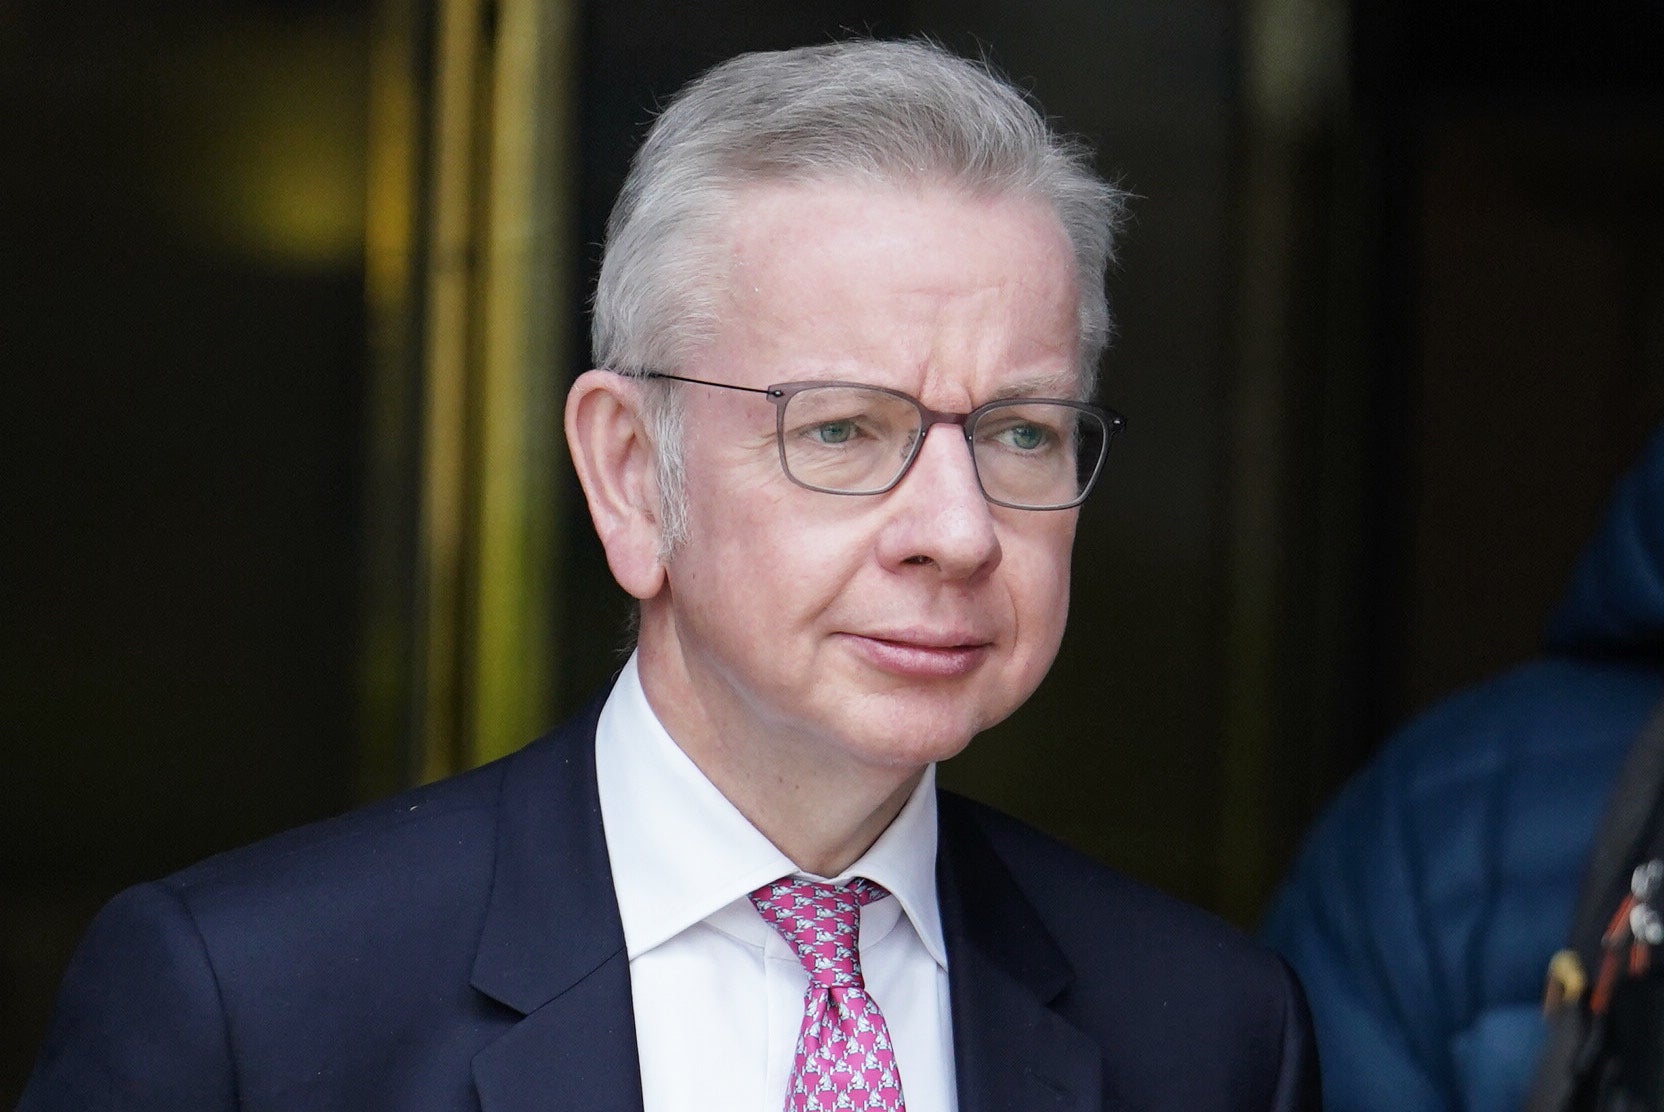 Michael Gove speaks on antisemitism after Jewish hate crimes triple in London